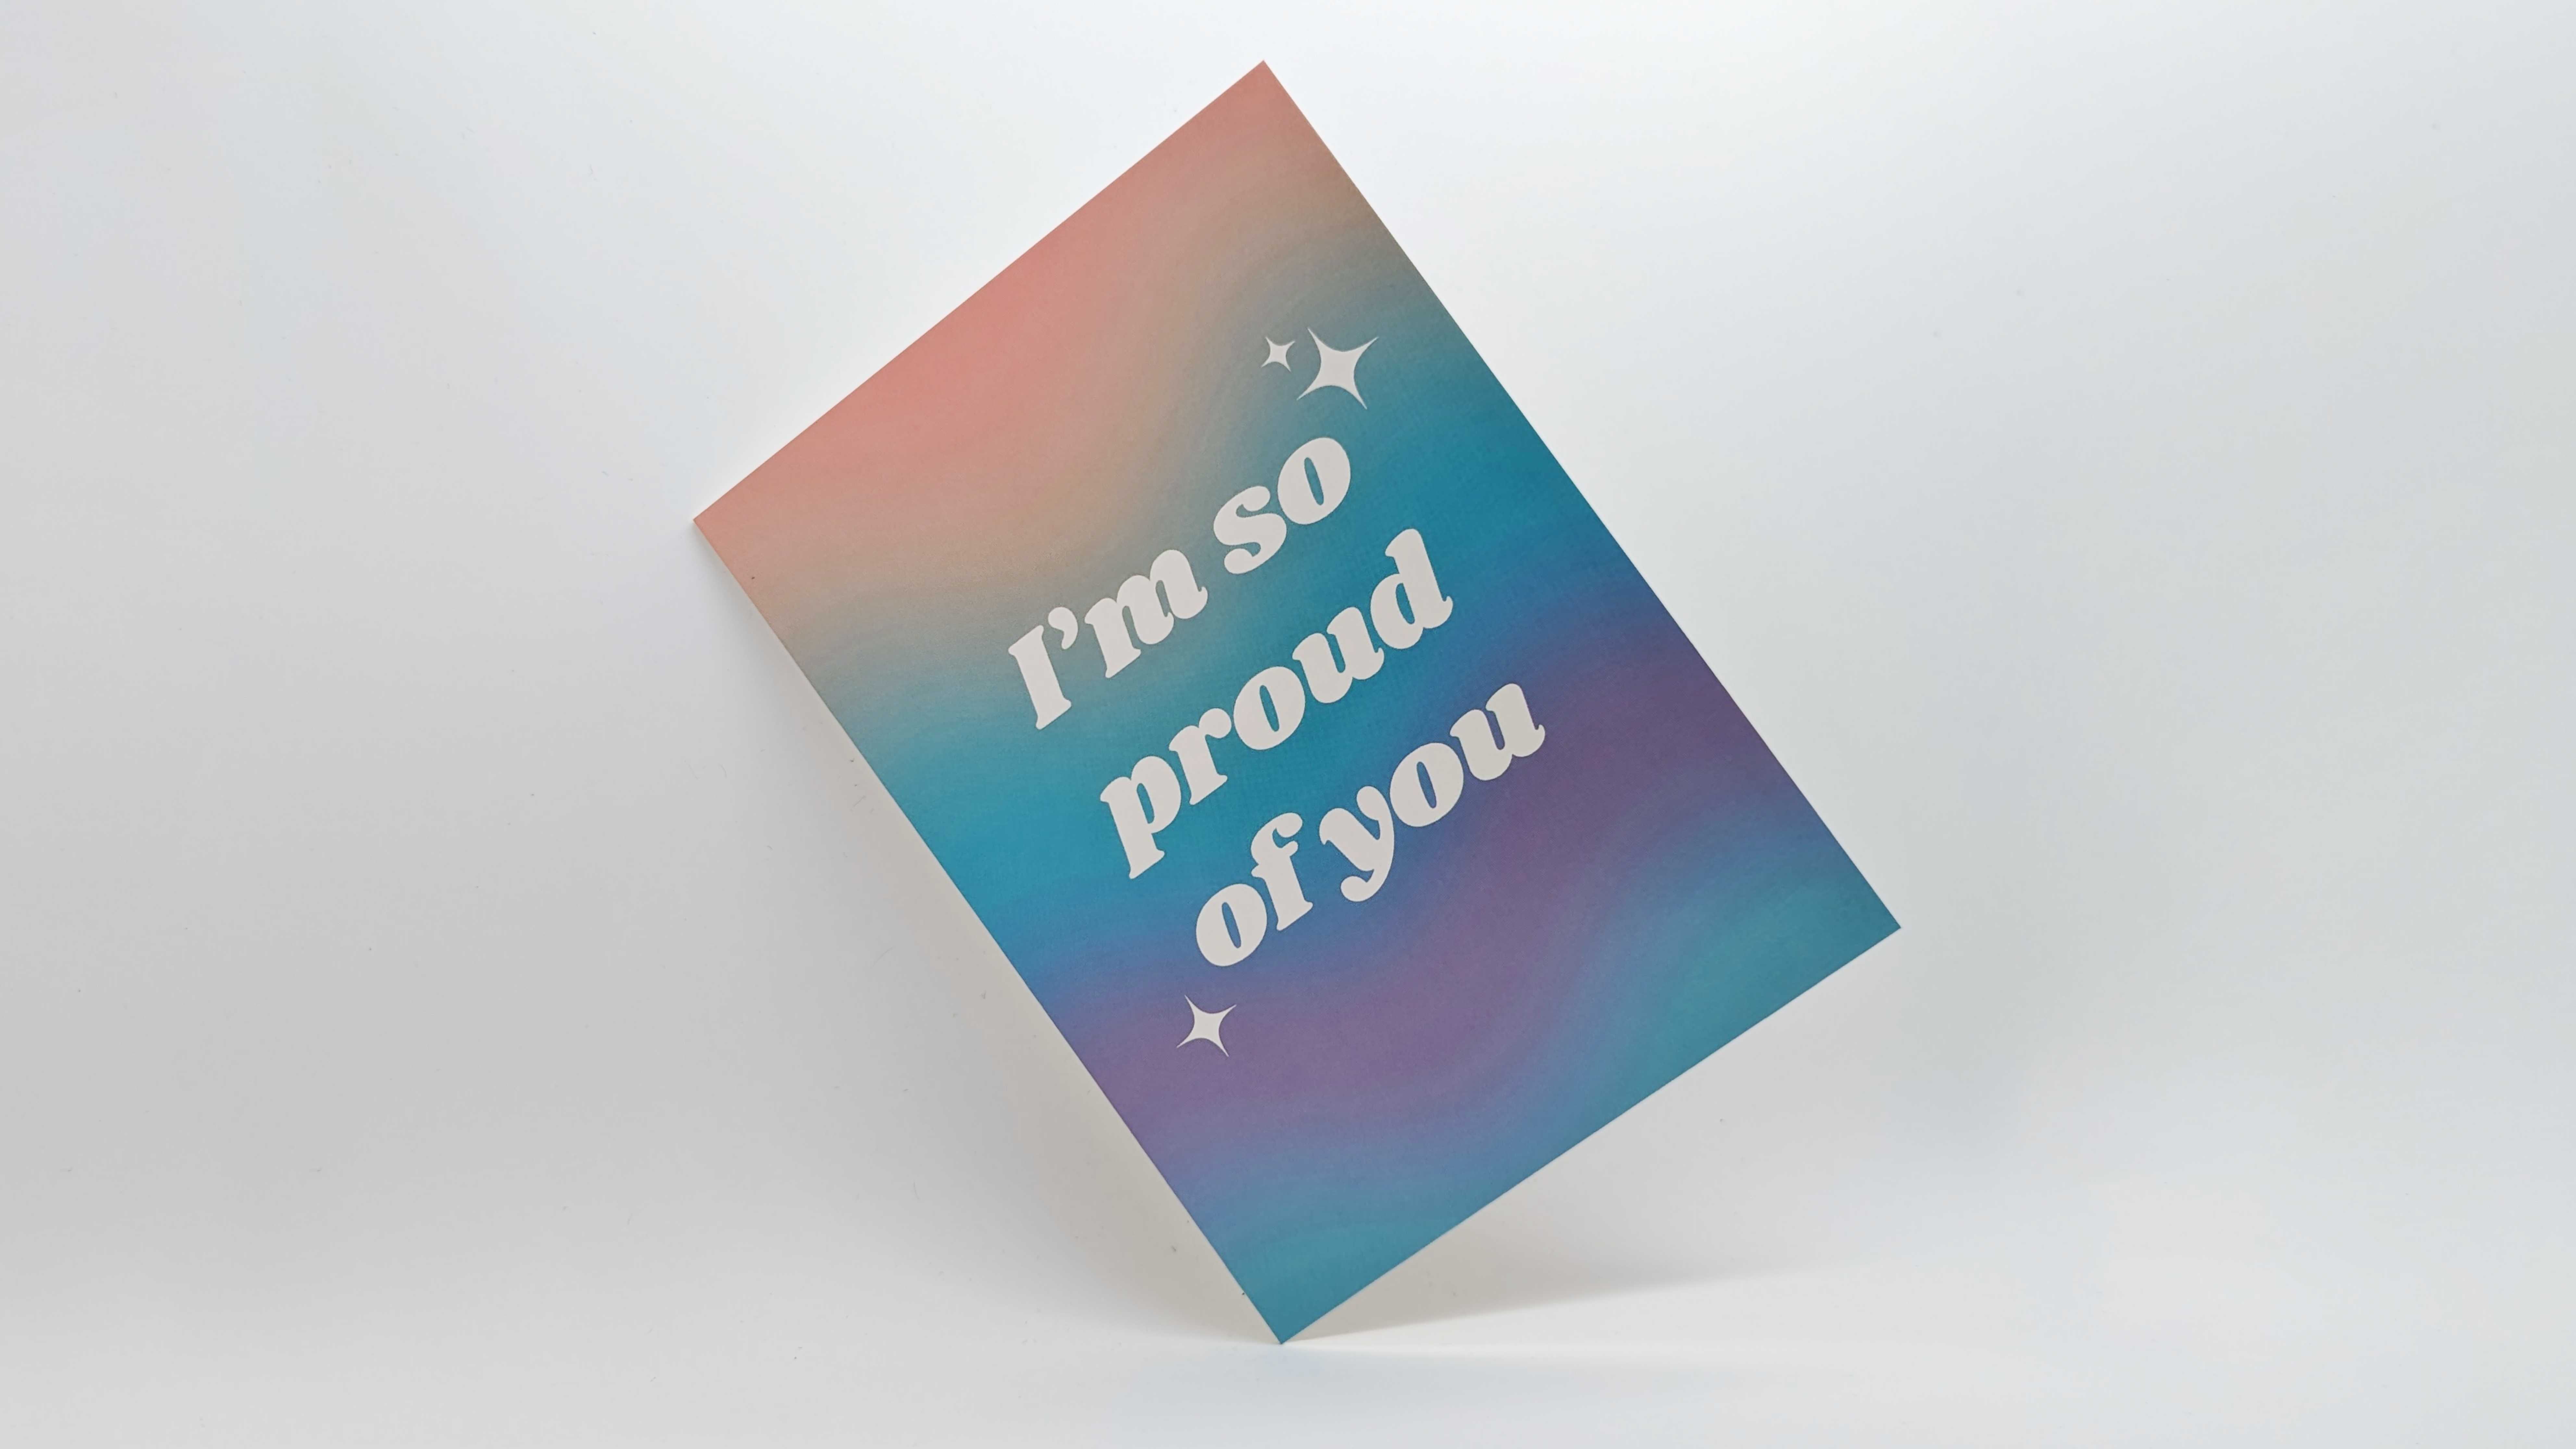 "I'm so proud of you" greetings card